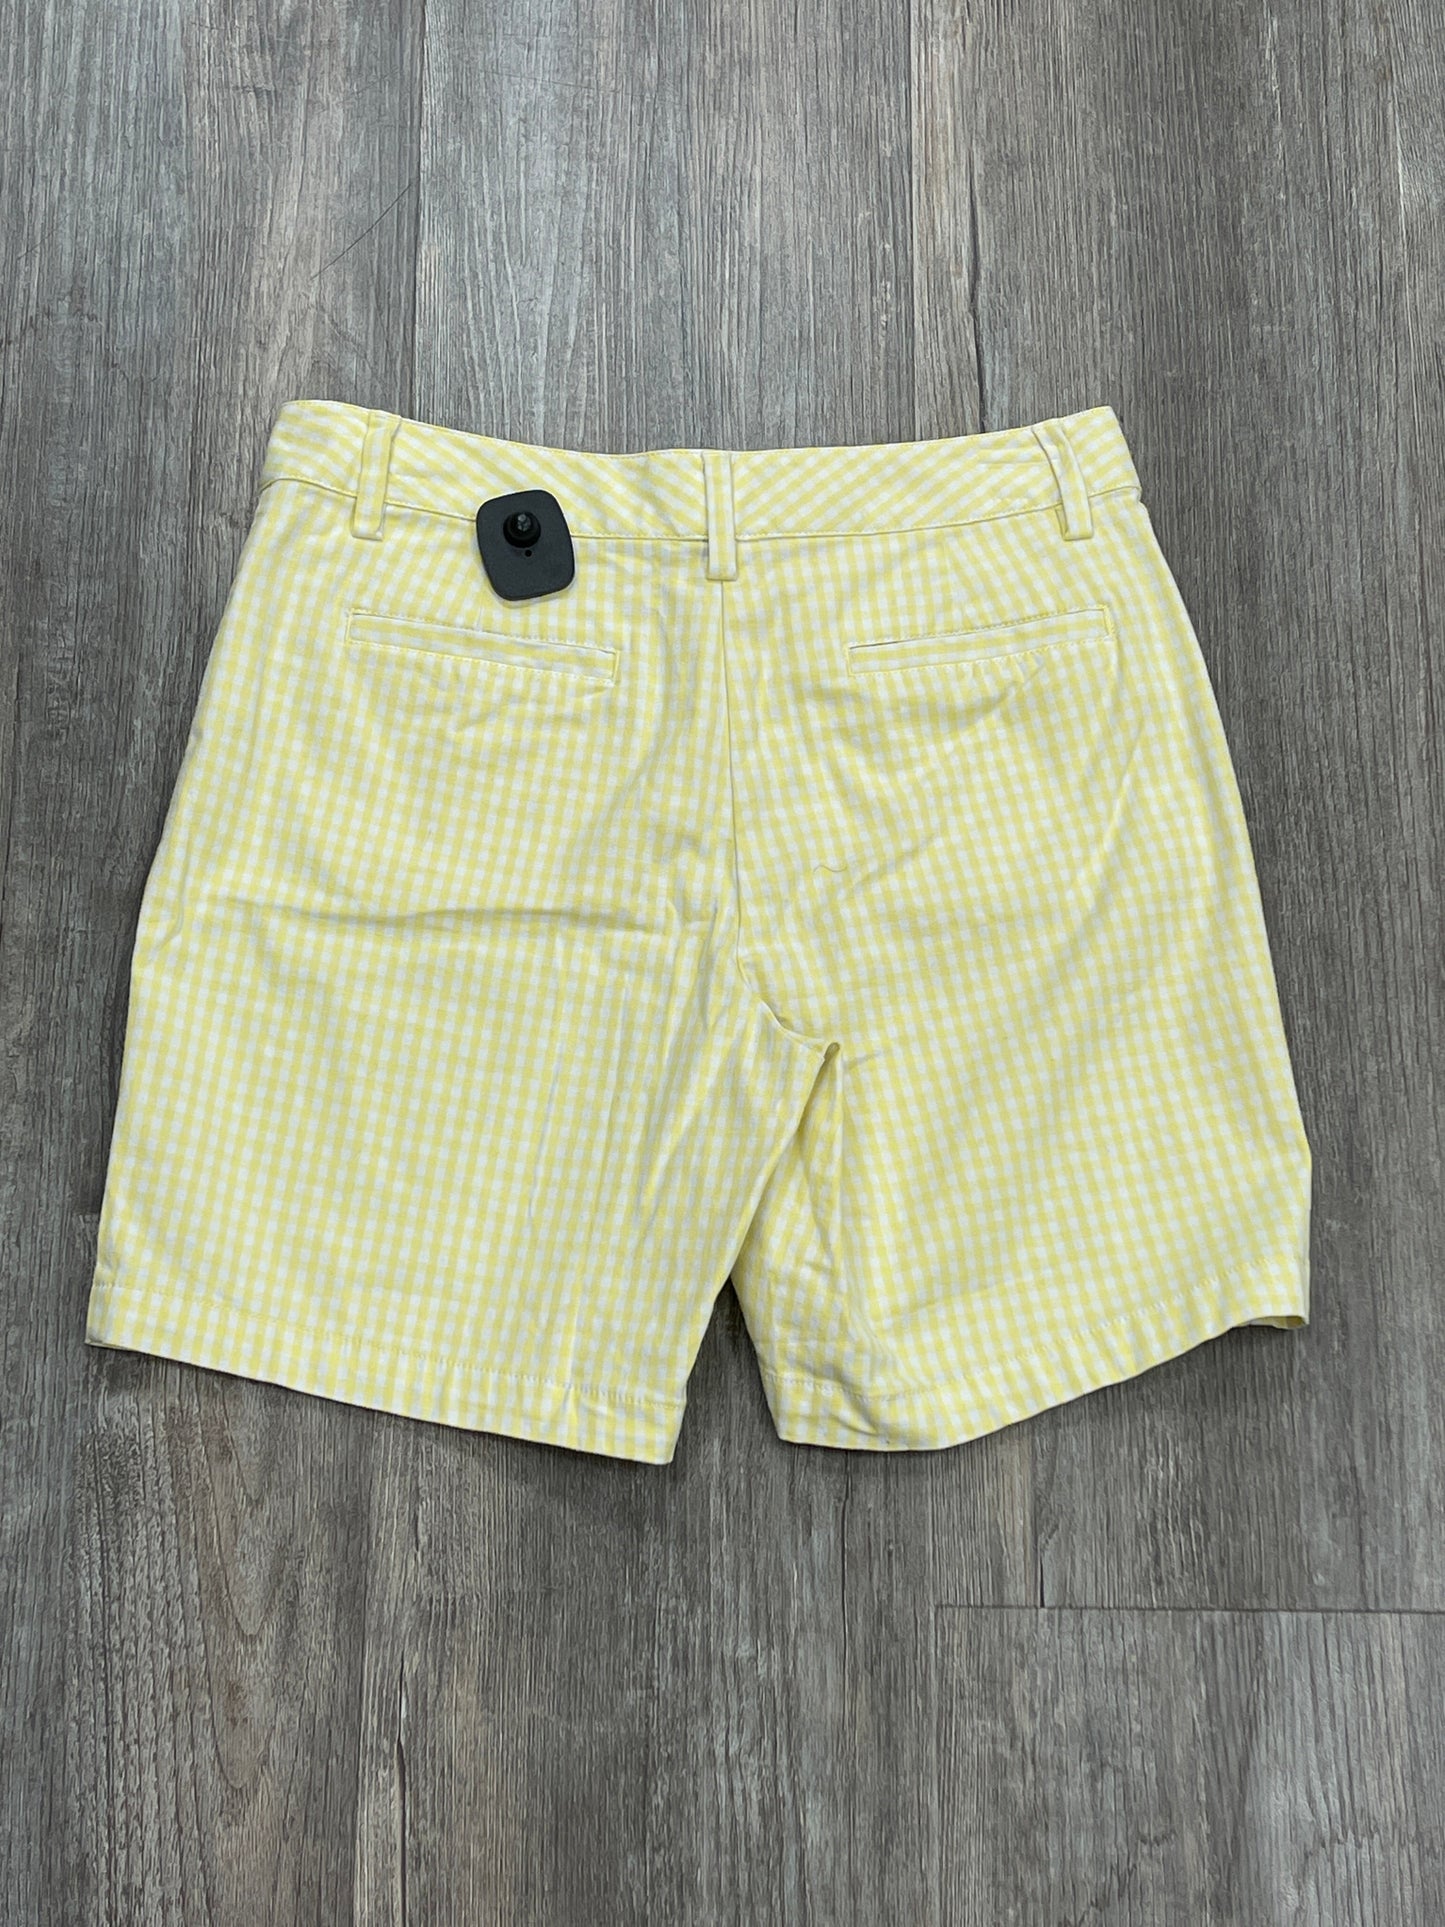 Shorts By Lands End  Size: 4